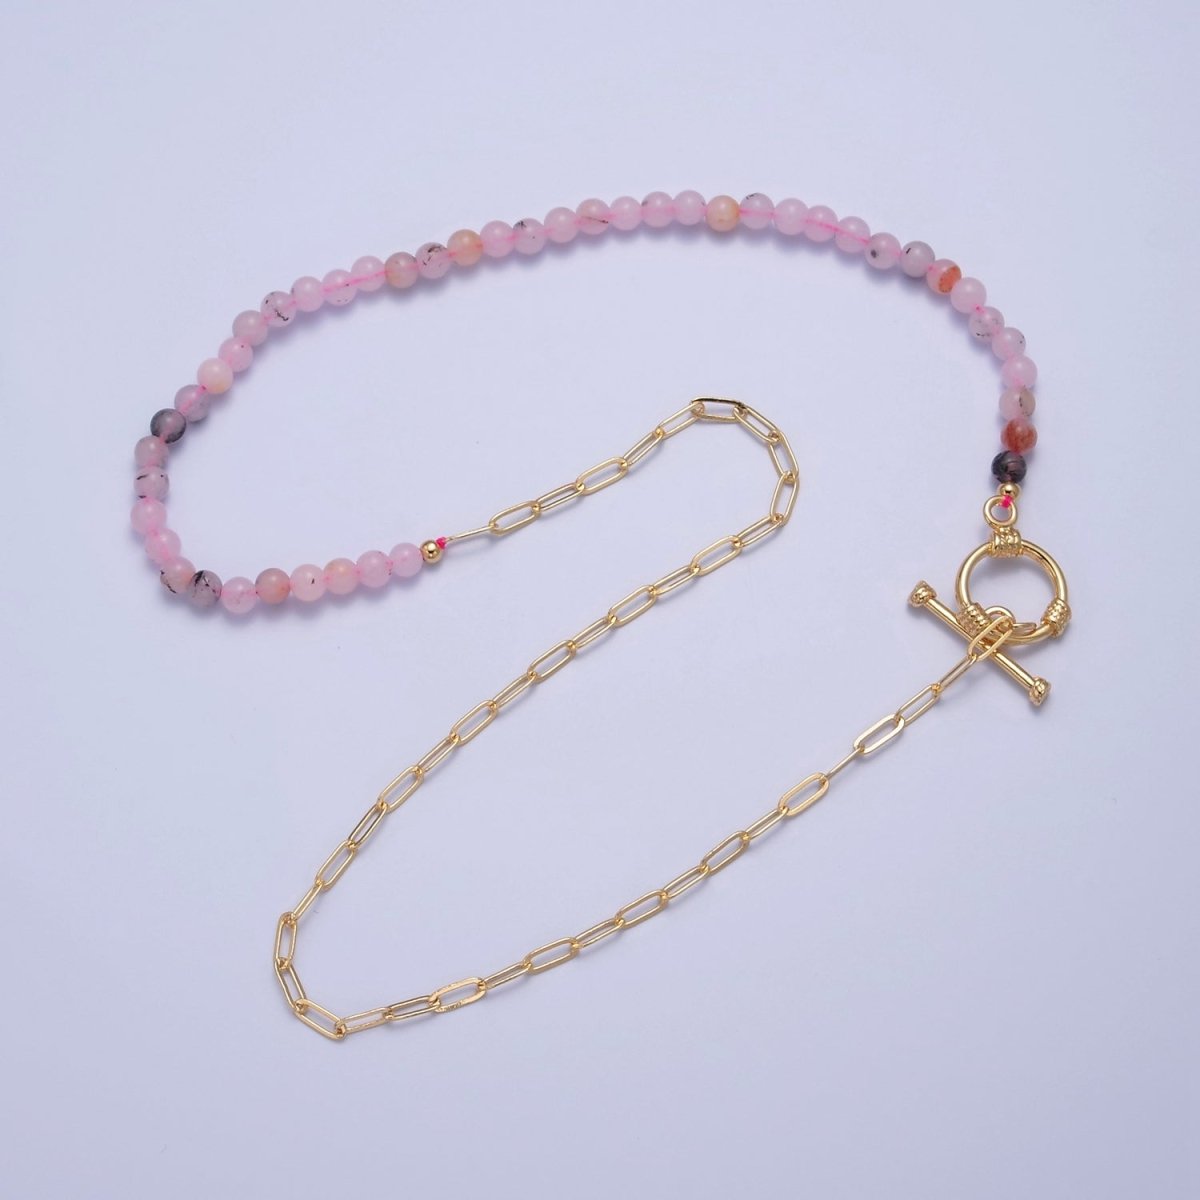 Dainty Half Bead Half Link Chain Necklace, 24k Gold Filled Paperclip Chain with Pink Jade Necklace Toggle Clasp | WA-971 Clearance Pricing - DLUXCA